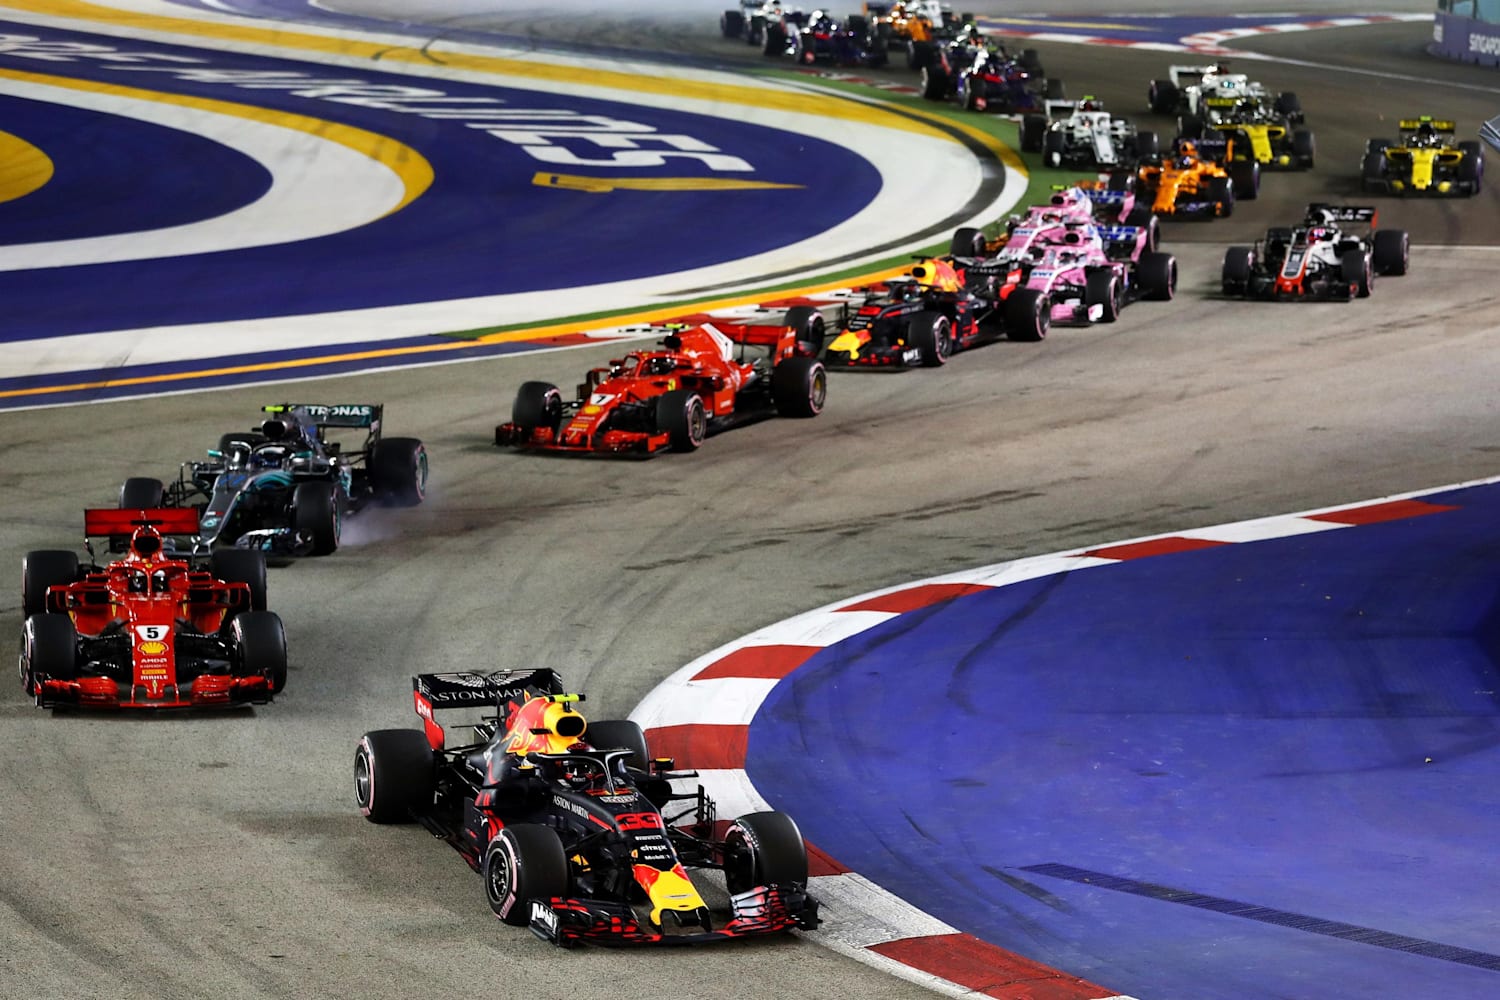 Singapore F1 Grand Prix 2018 Race report and results